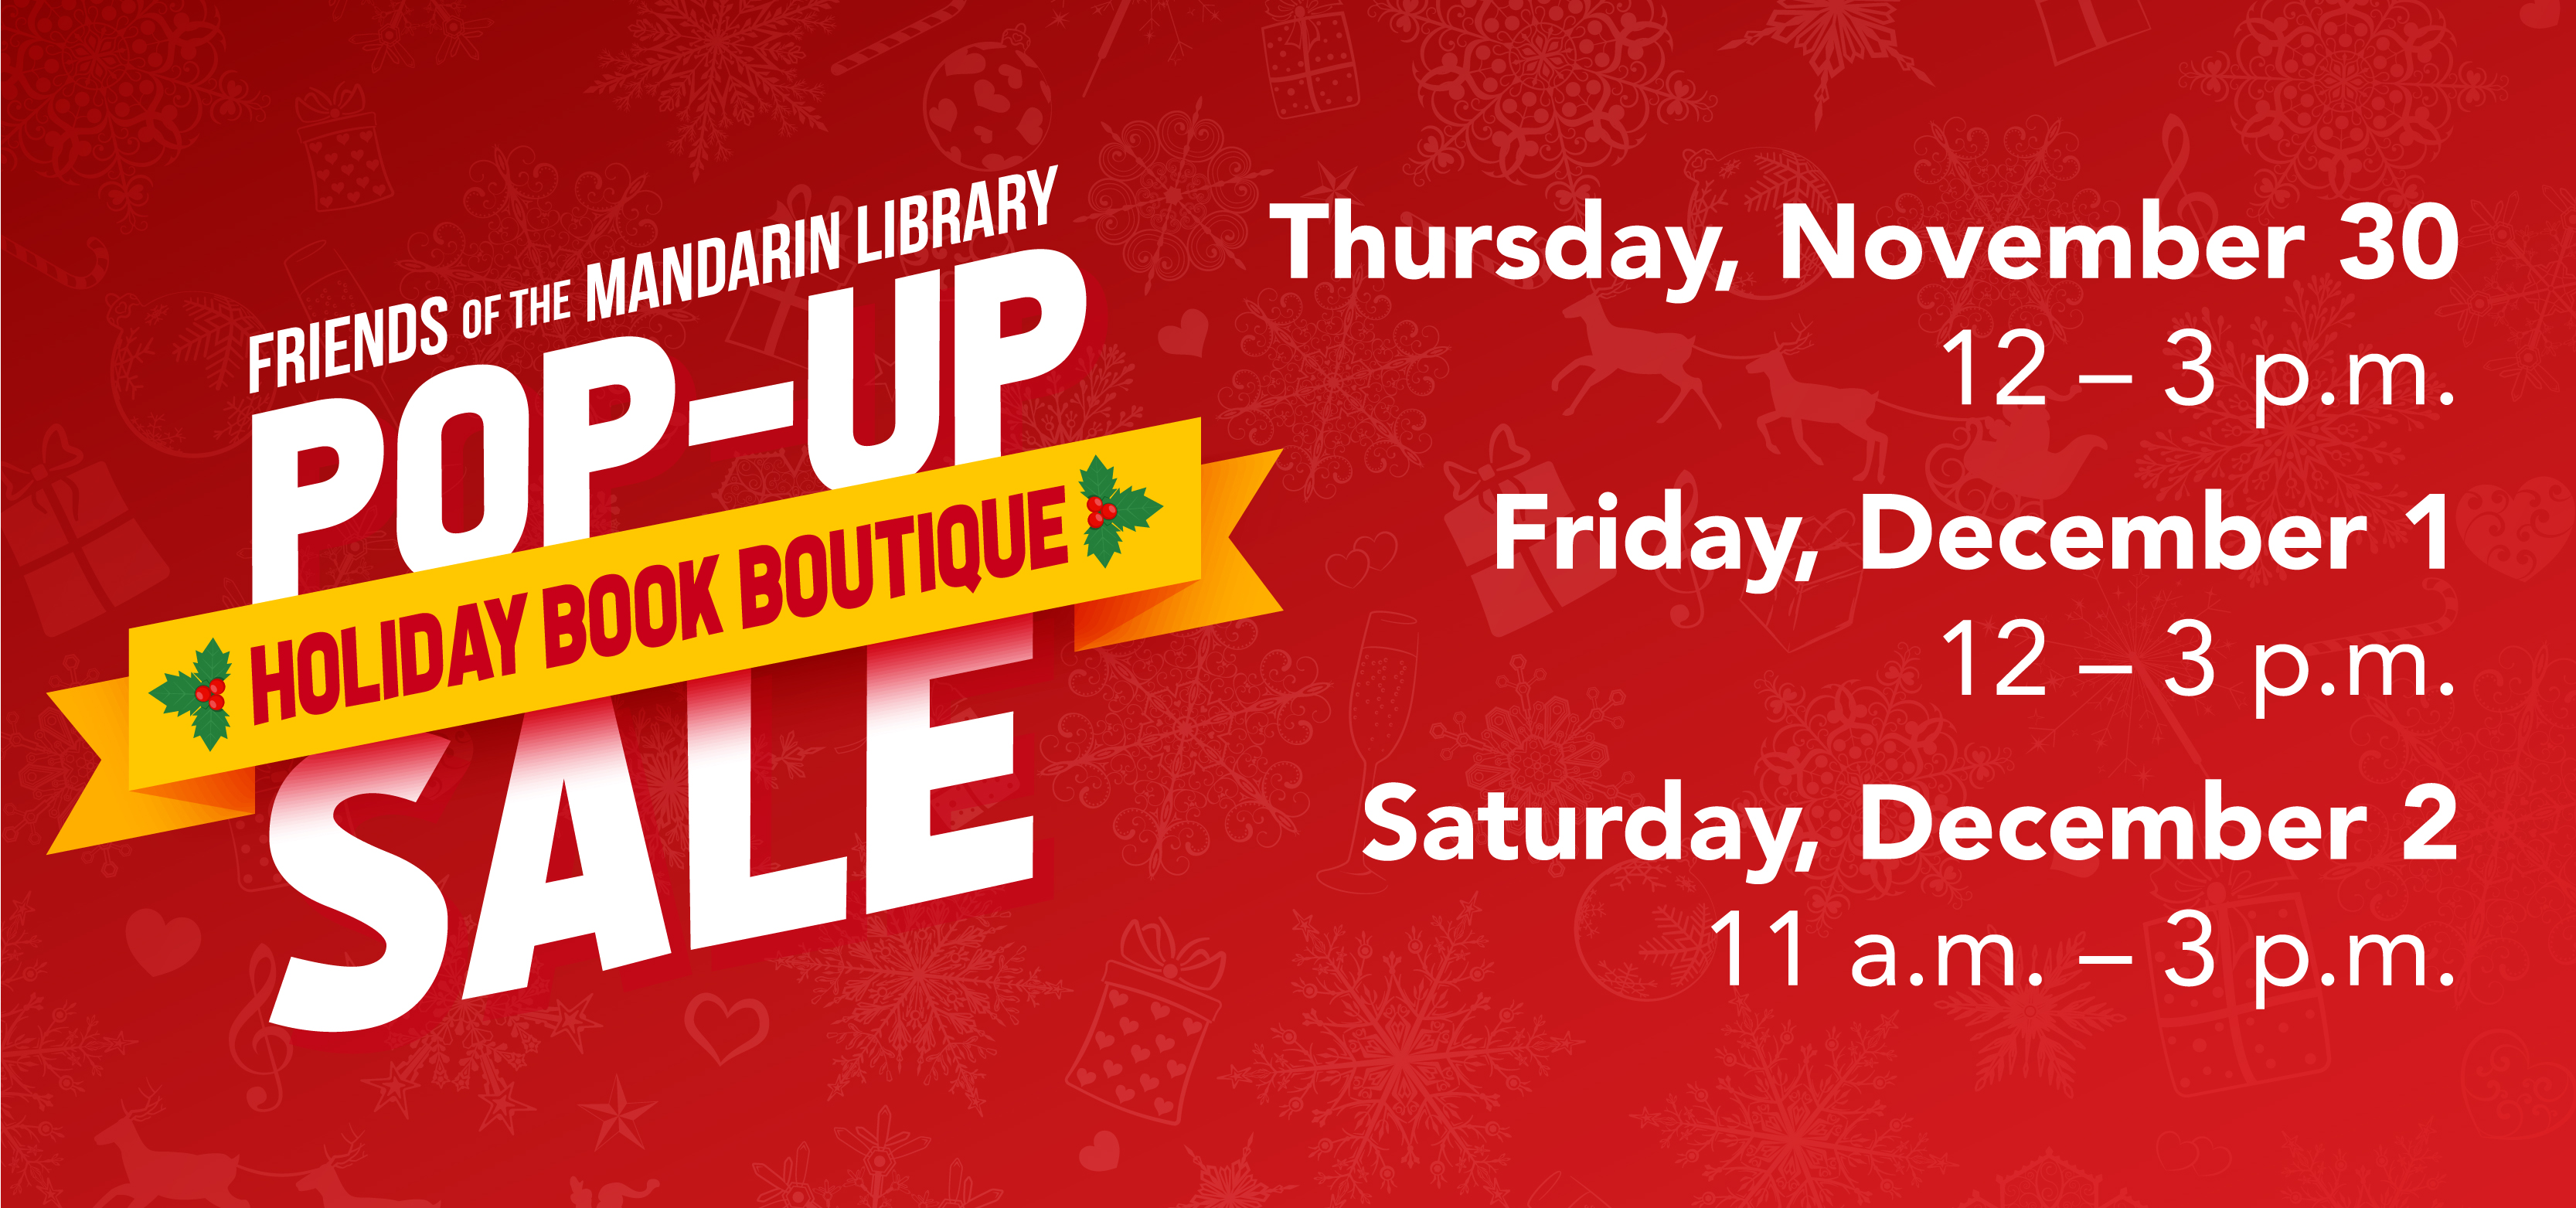 Friends of the Mandarin Library holiday book boutique pop-up sale on November 30 and December 1 from 12 to 3 pm and on December 